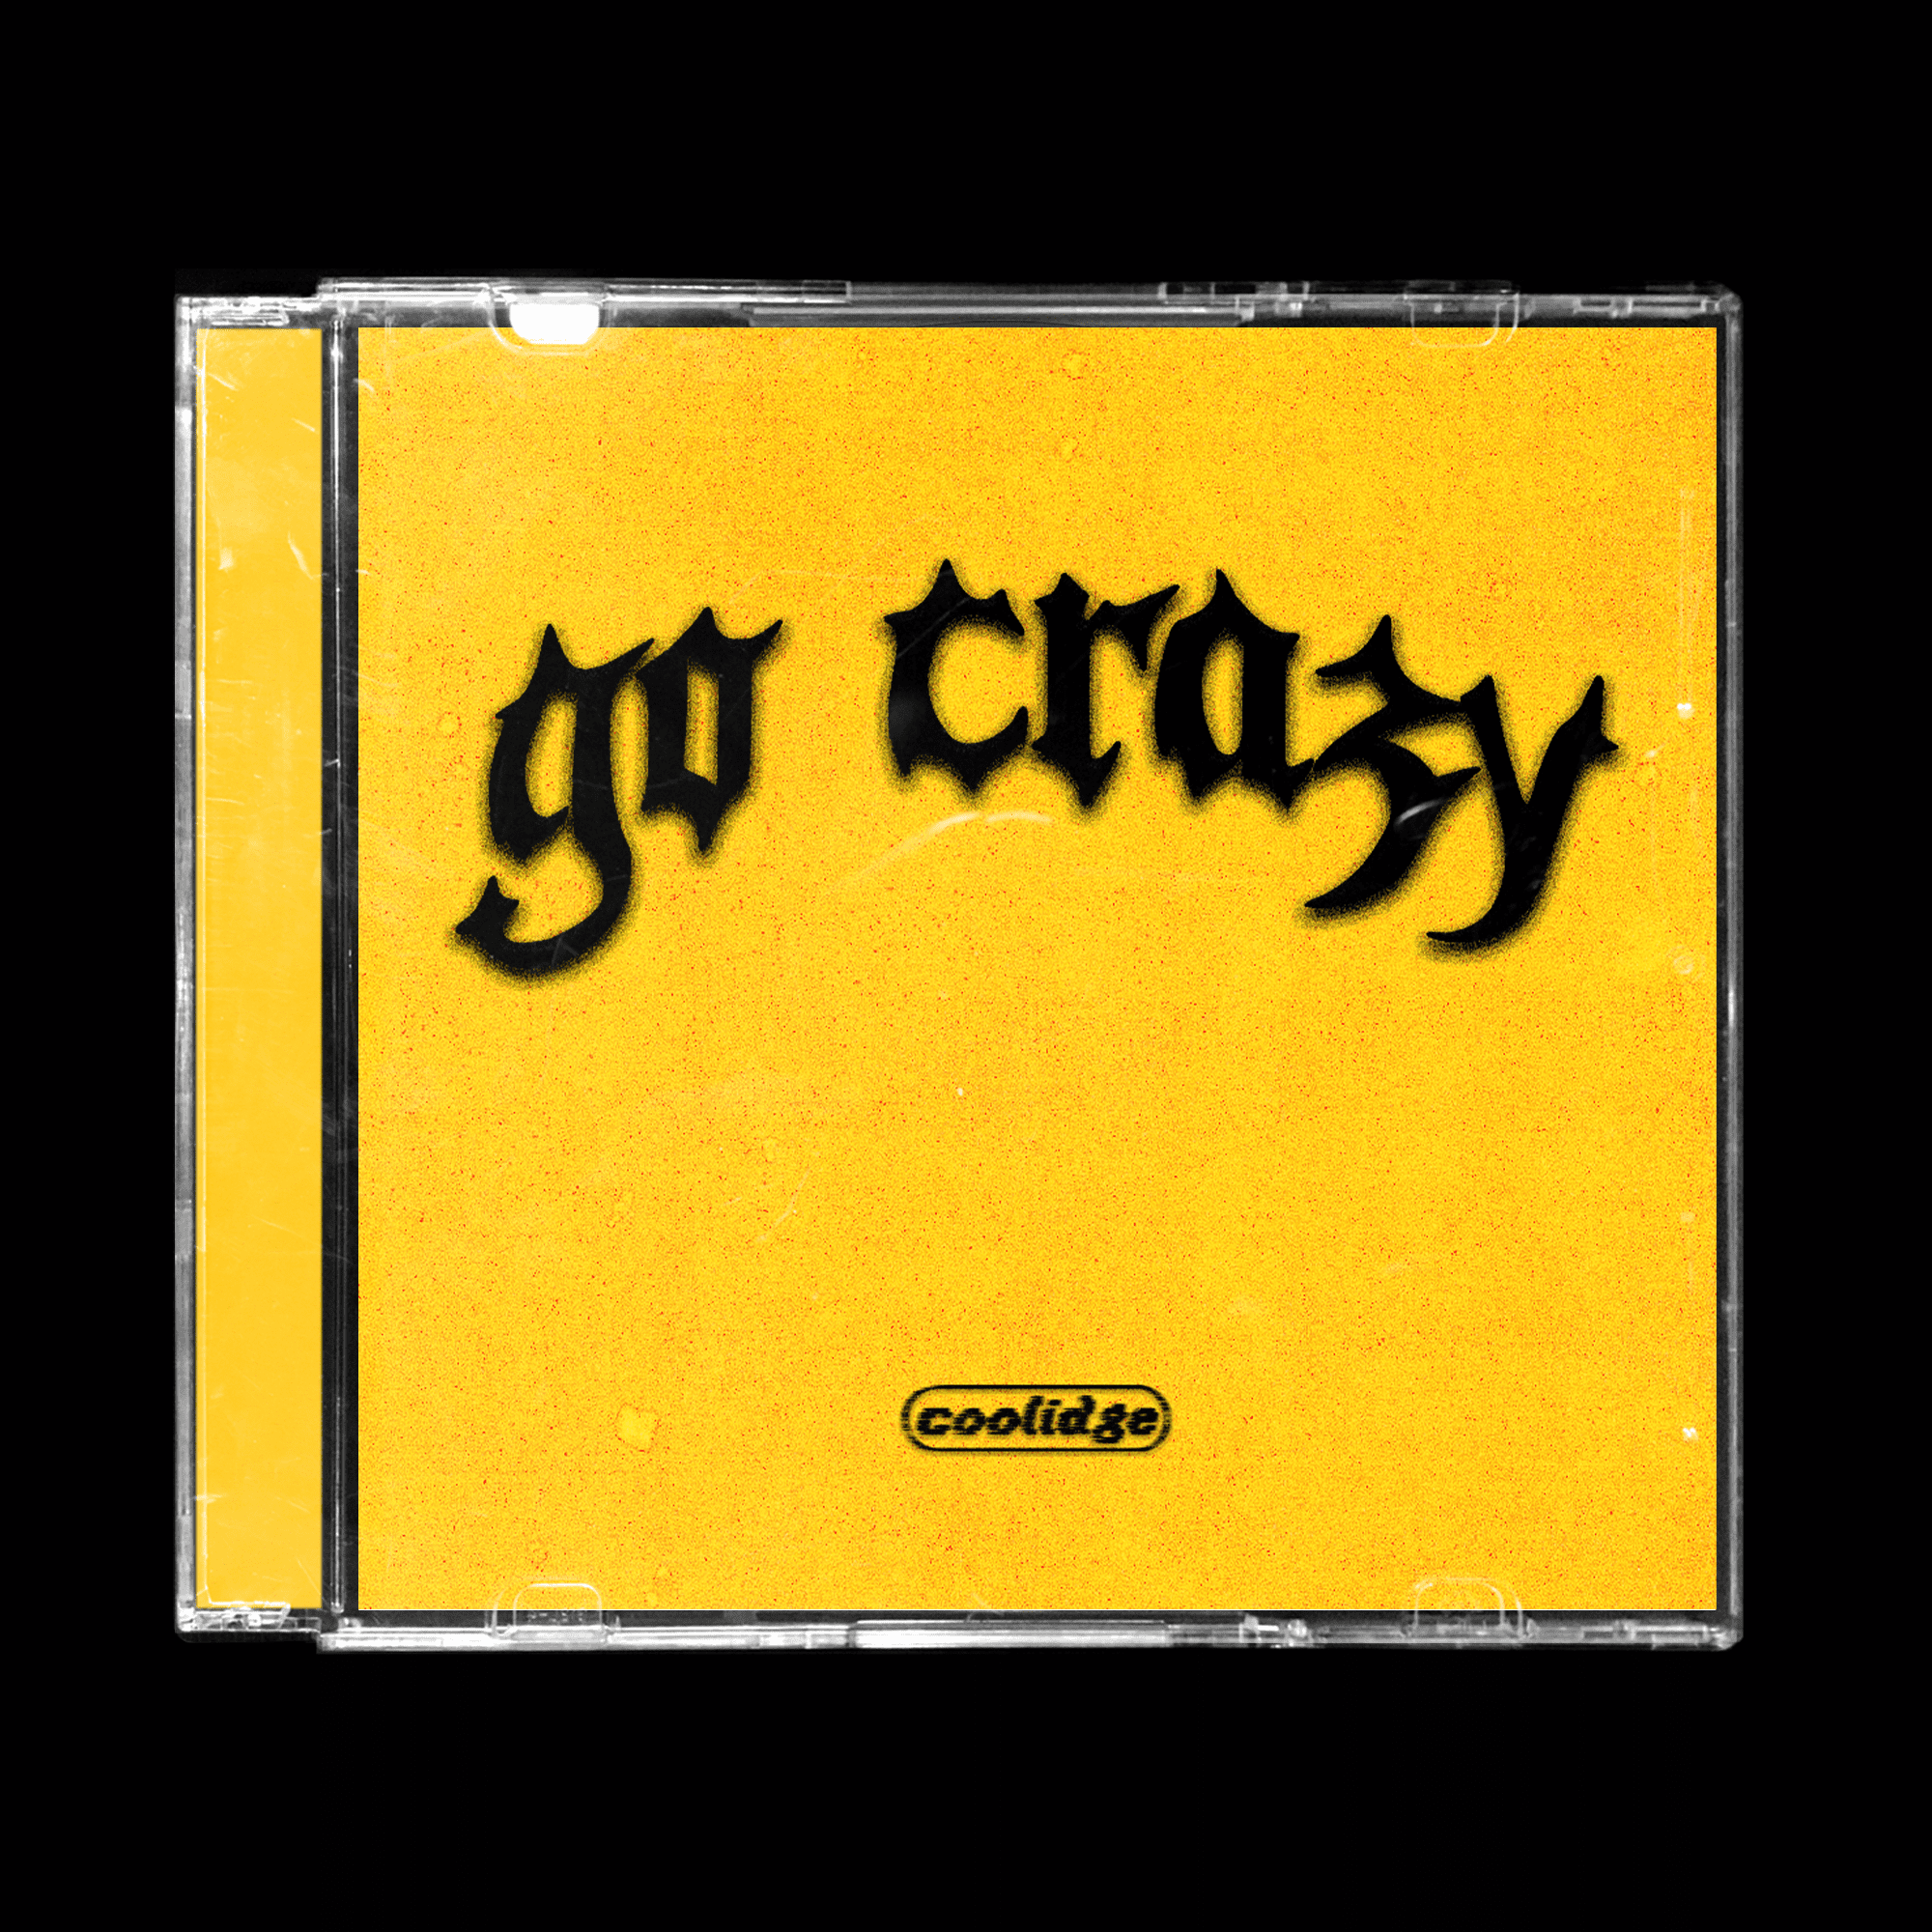 Cover art for tyler coolidge's song: GO CRAZY